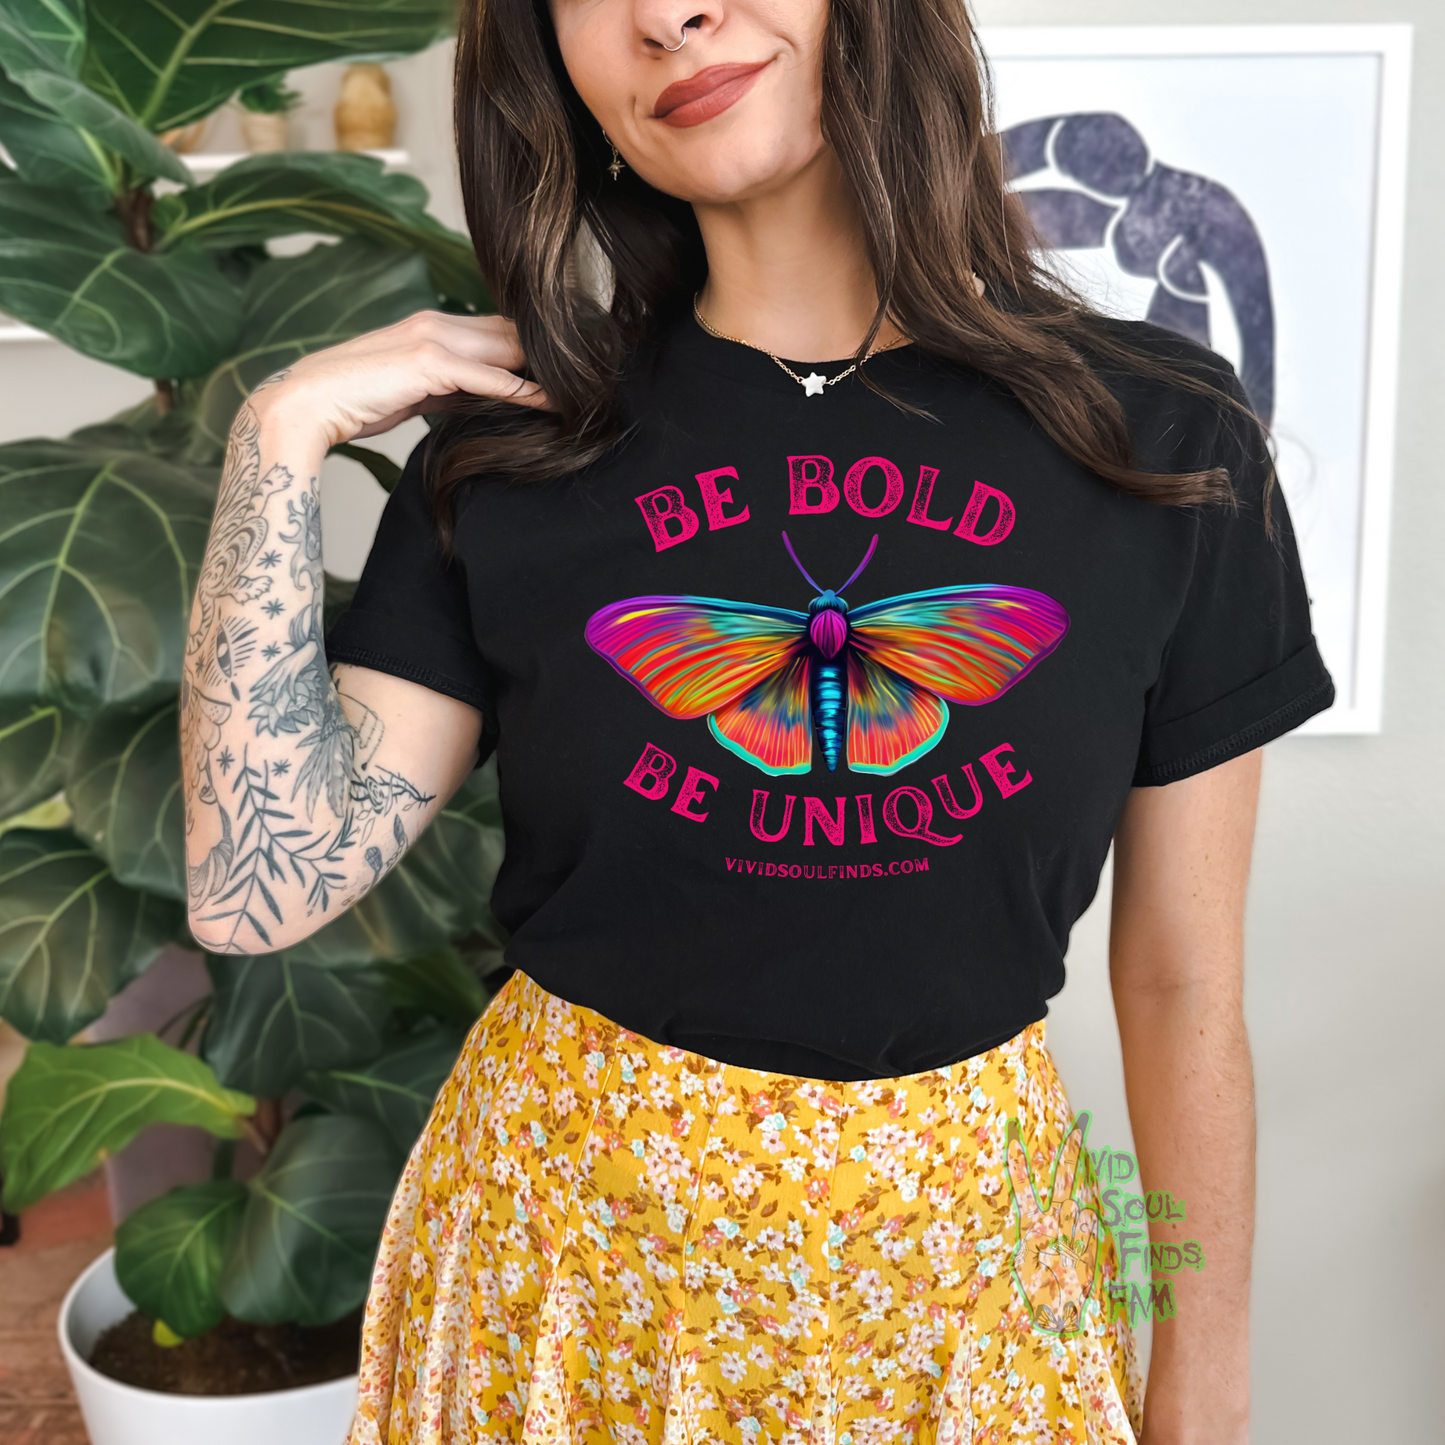 Be Bold EXCLUSIVE VSF T-shirt